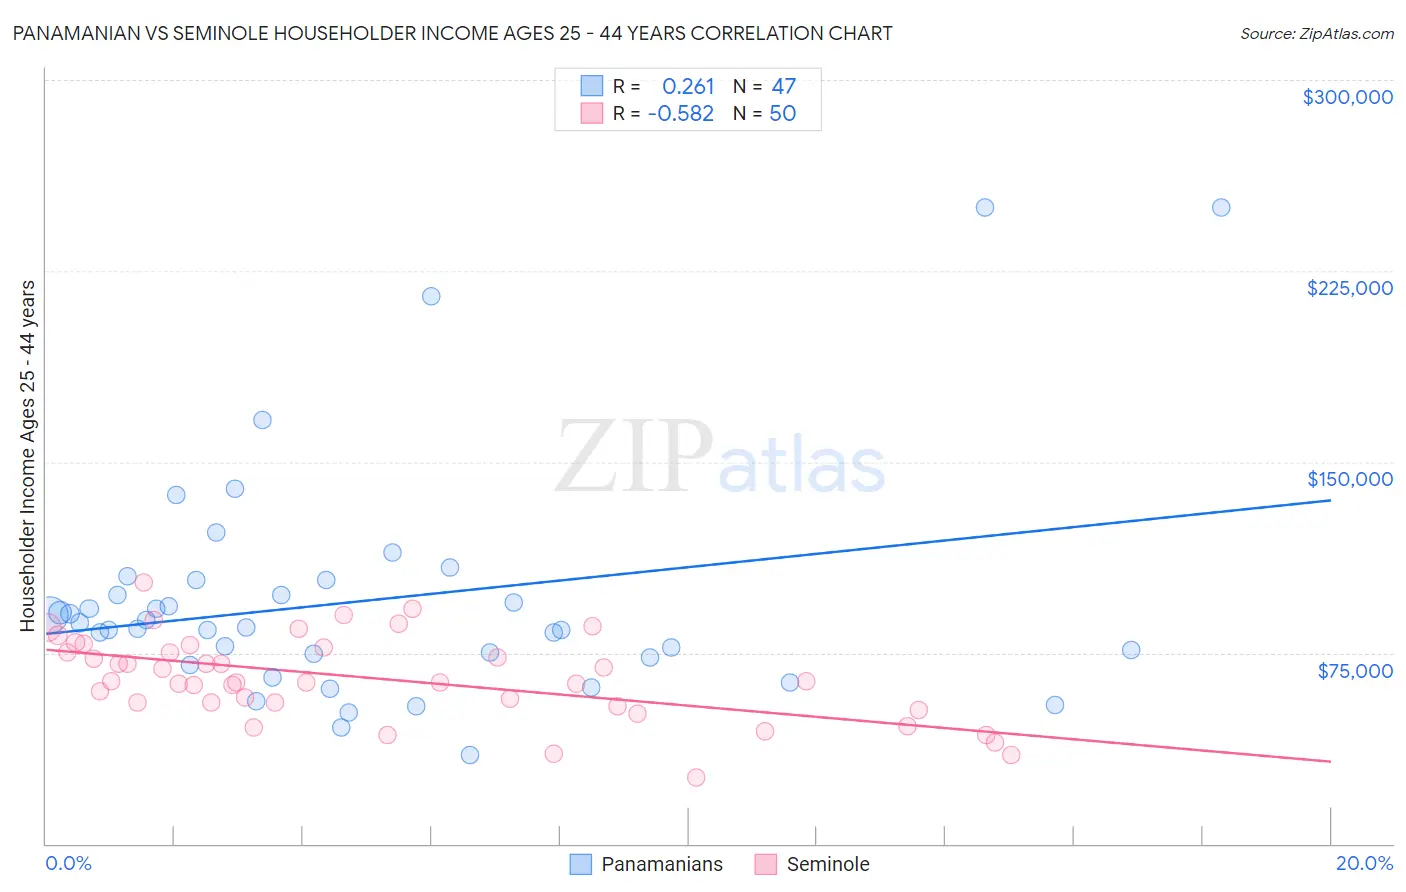 Panamanian vs Seminole Householder Income Ages 25 - 44 years